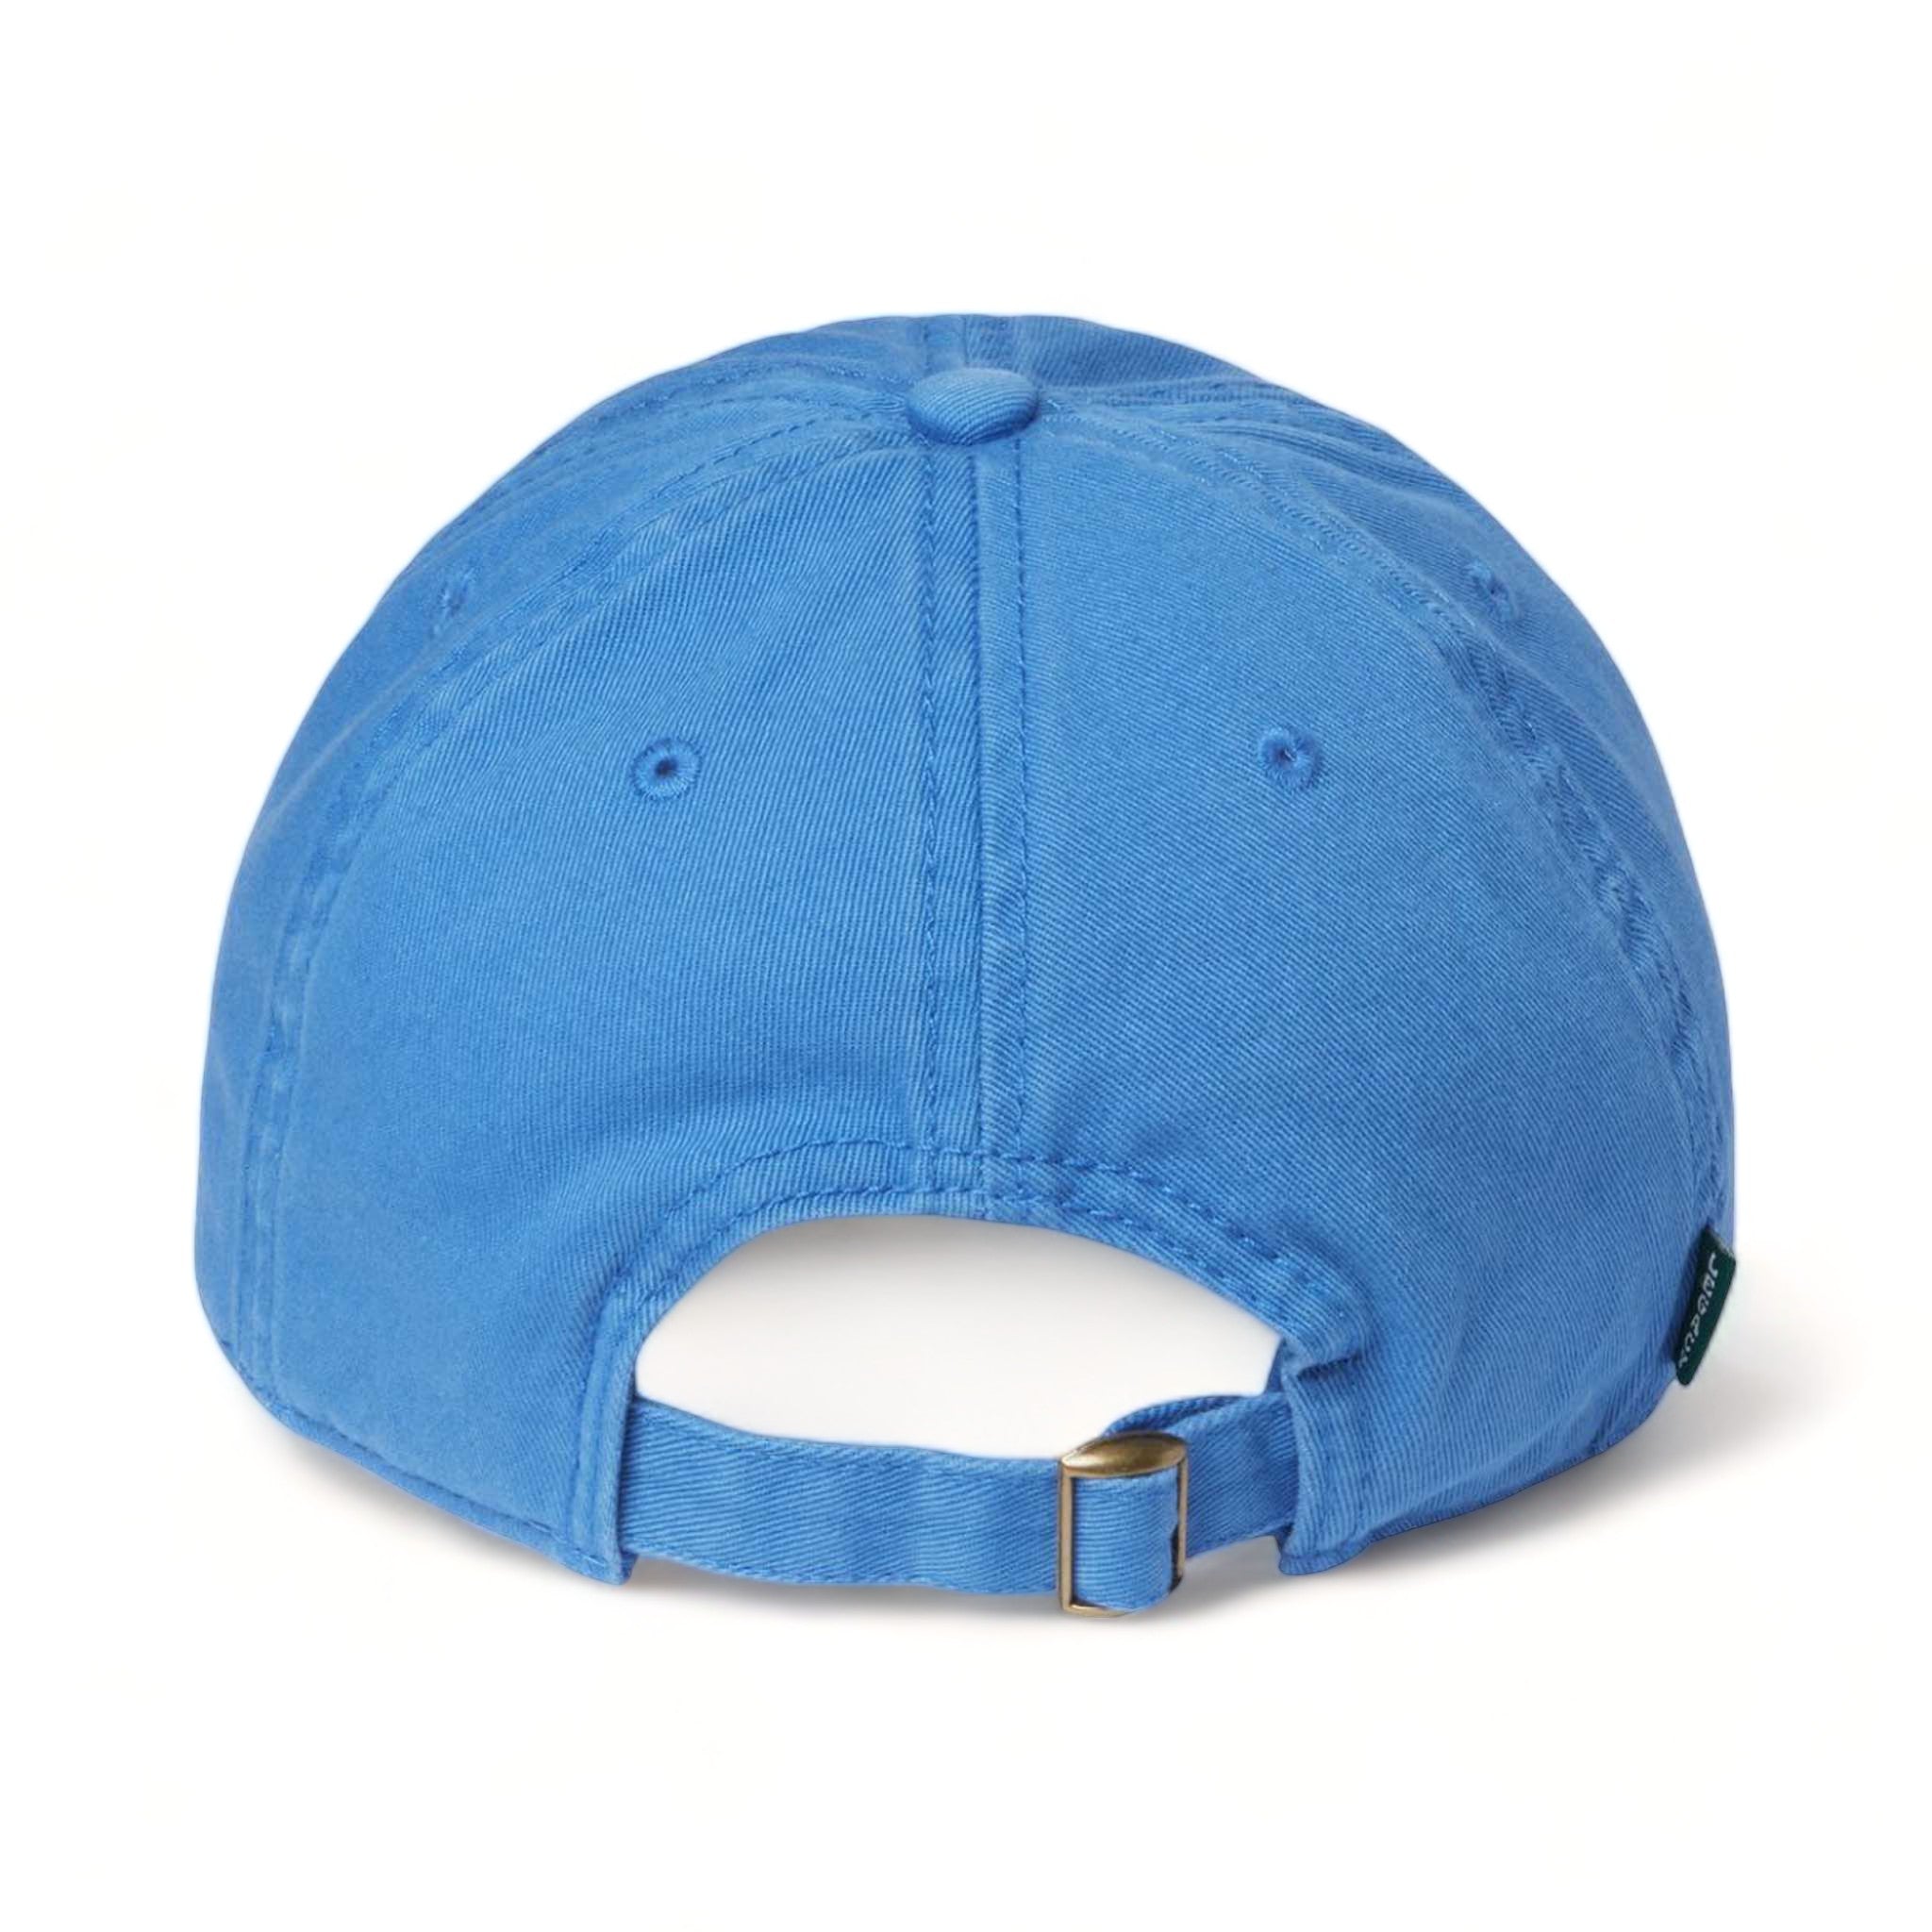 Back view of LEGACY EZA custom hat in pacific blue